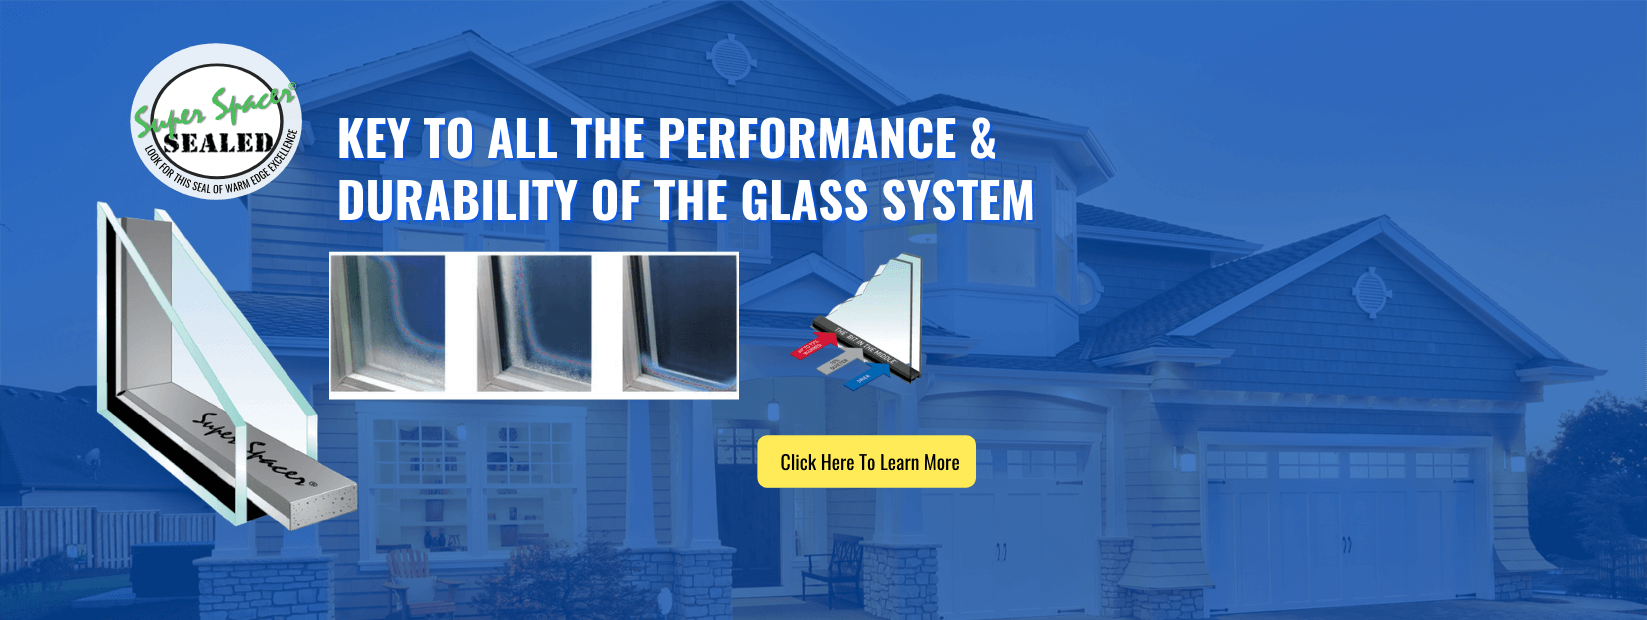 Replacement Windows With Super Spacer Glass System